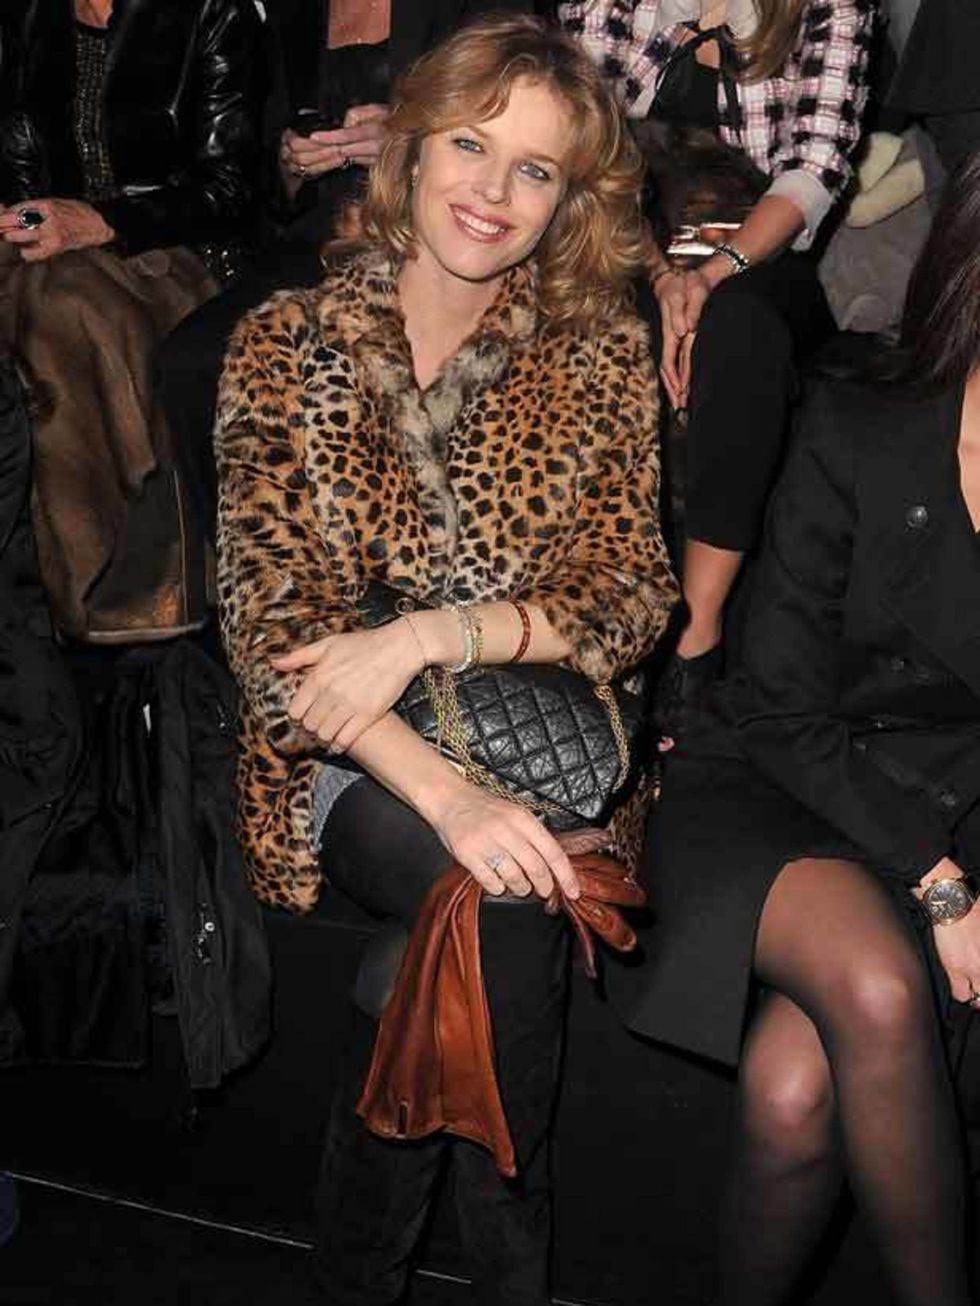 <p><a href="http://www.elleuk.com/starstyle/special-features/%28section%29/last-night-s-best-dressed/%28offset%29/0/%28img%29/538112">Eva Herzigova</a> at the Etam Spring/Summer 2011 collection launch at Grand Palais in Paris, 24 January 2011 </p>